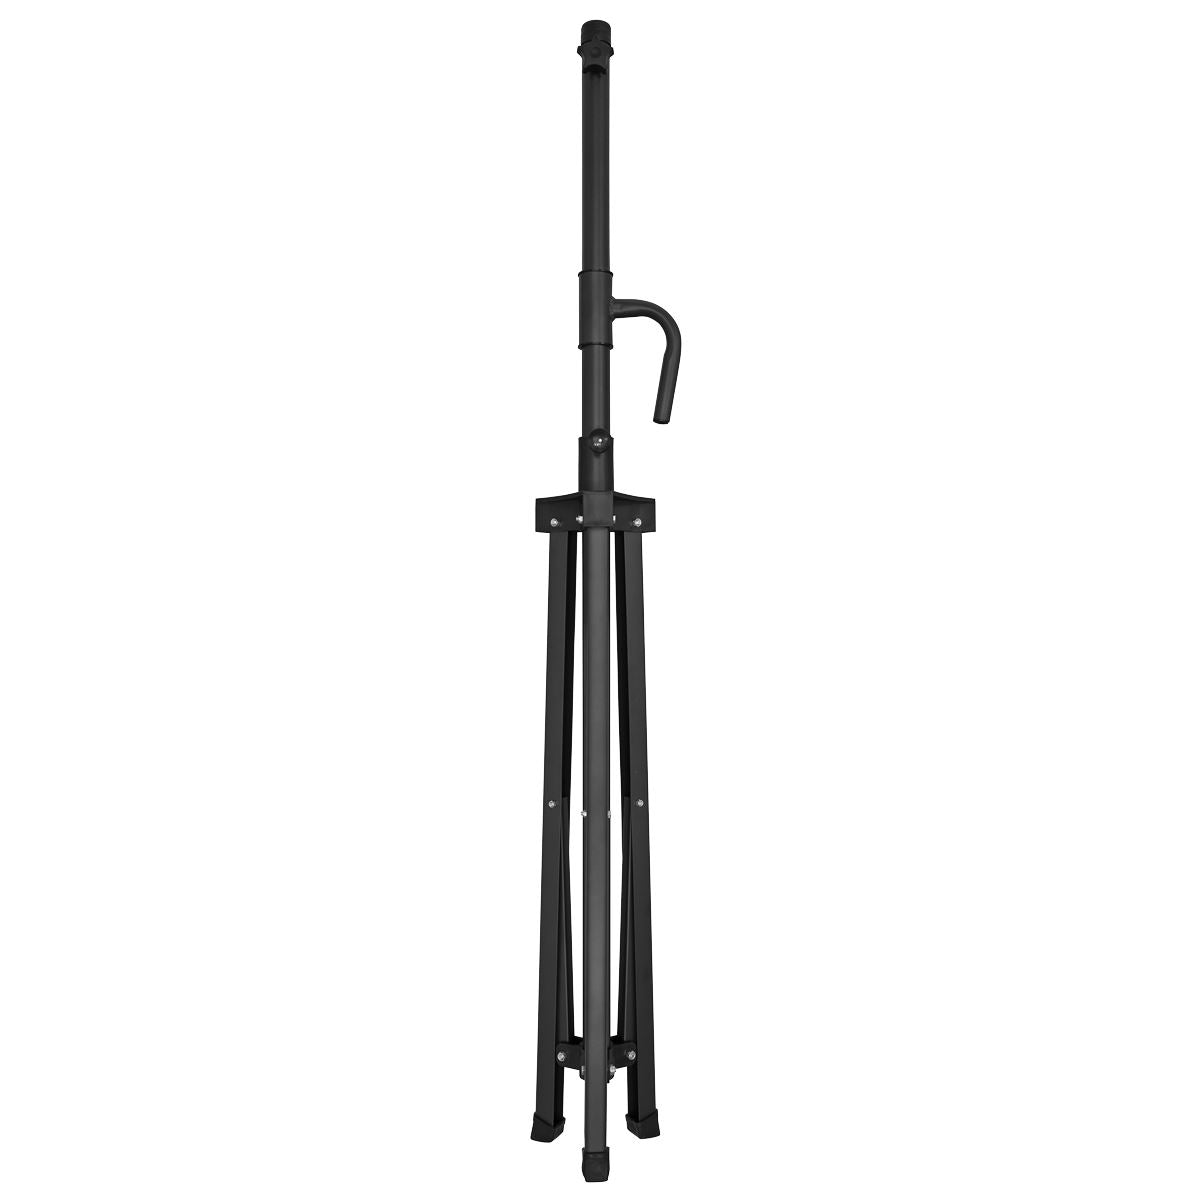 Sealey Tripod Stand for IR Heaters